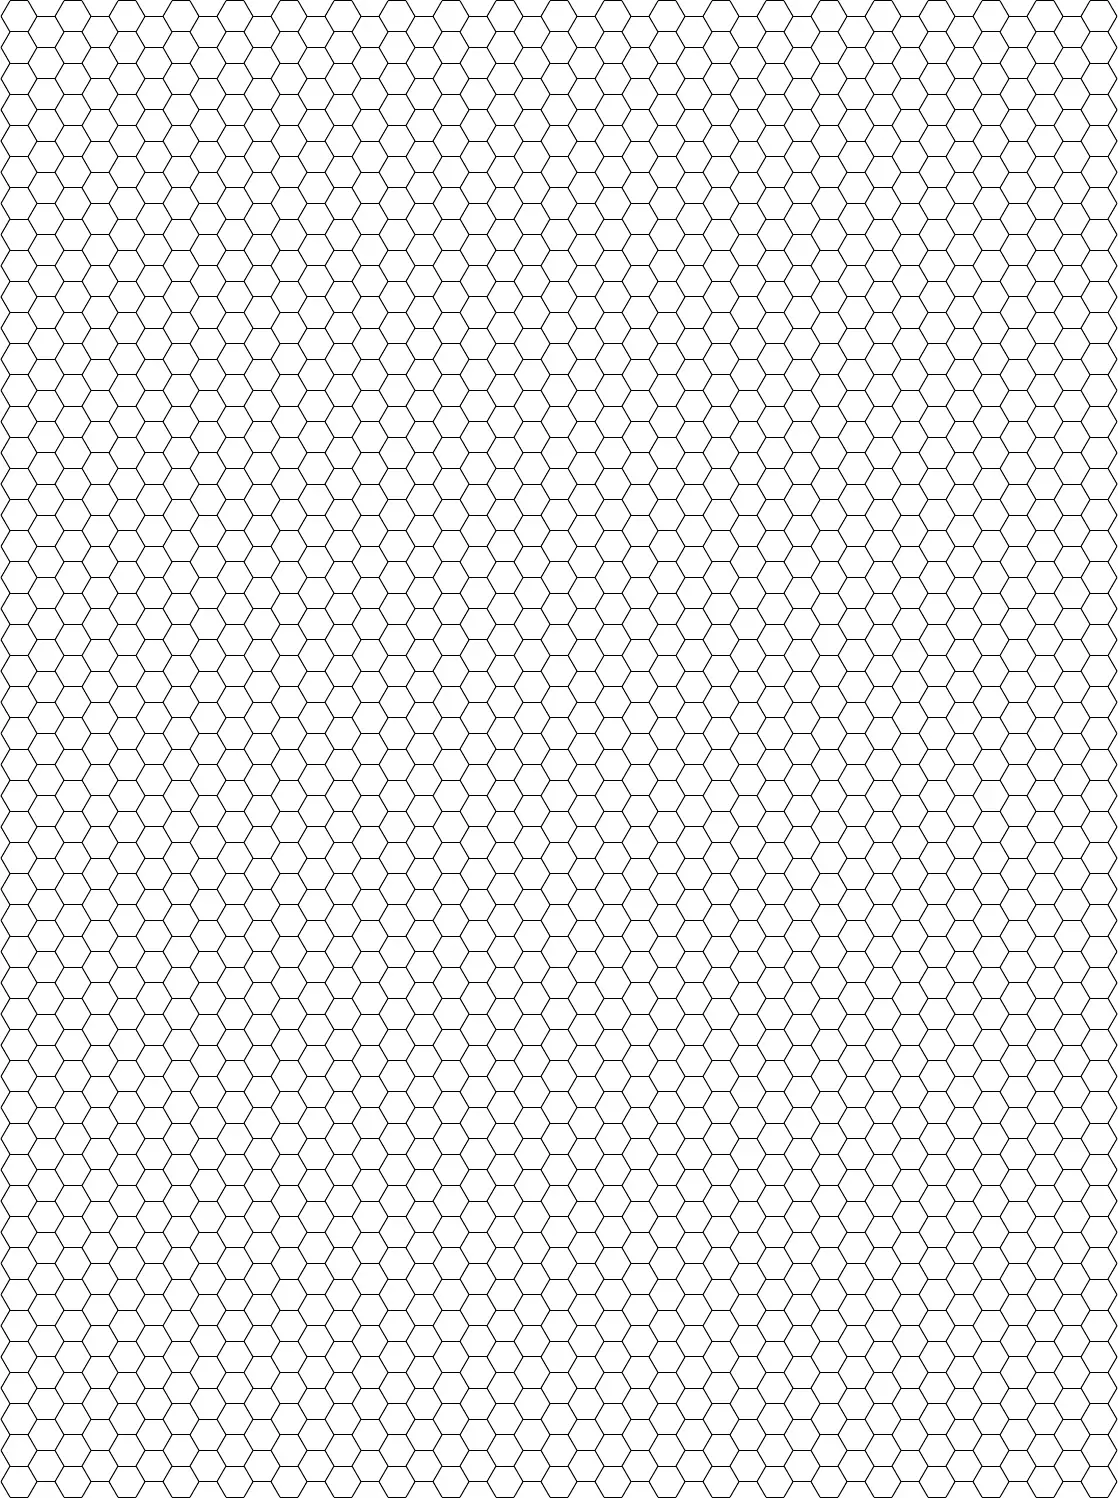 Free Printable Hexagon Graph Paper Template in PDF